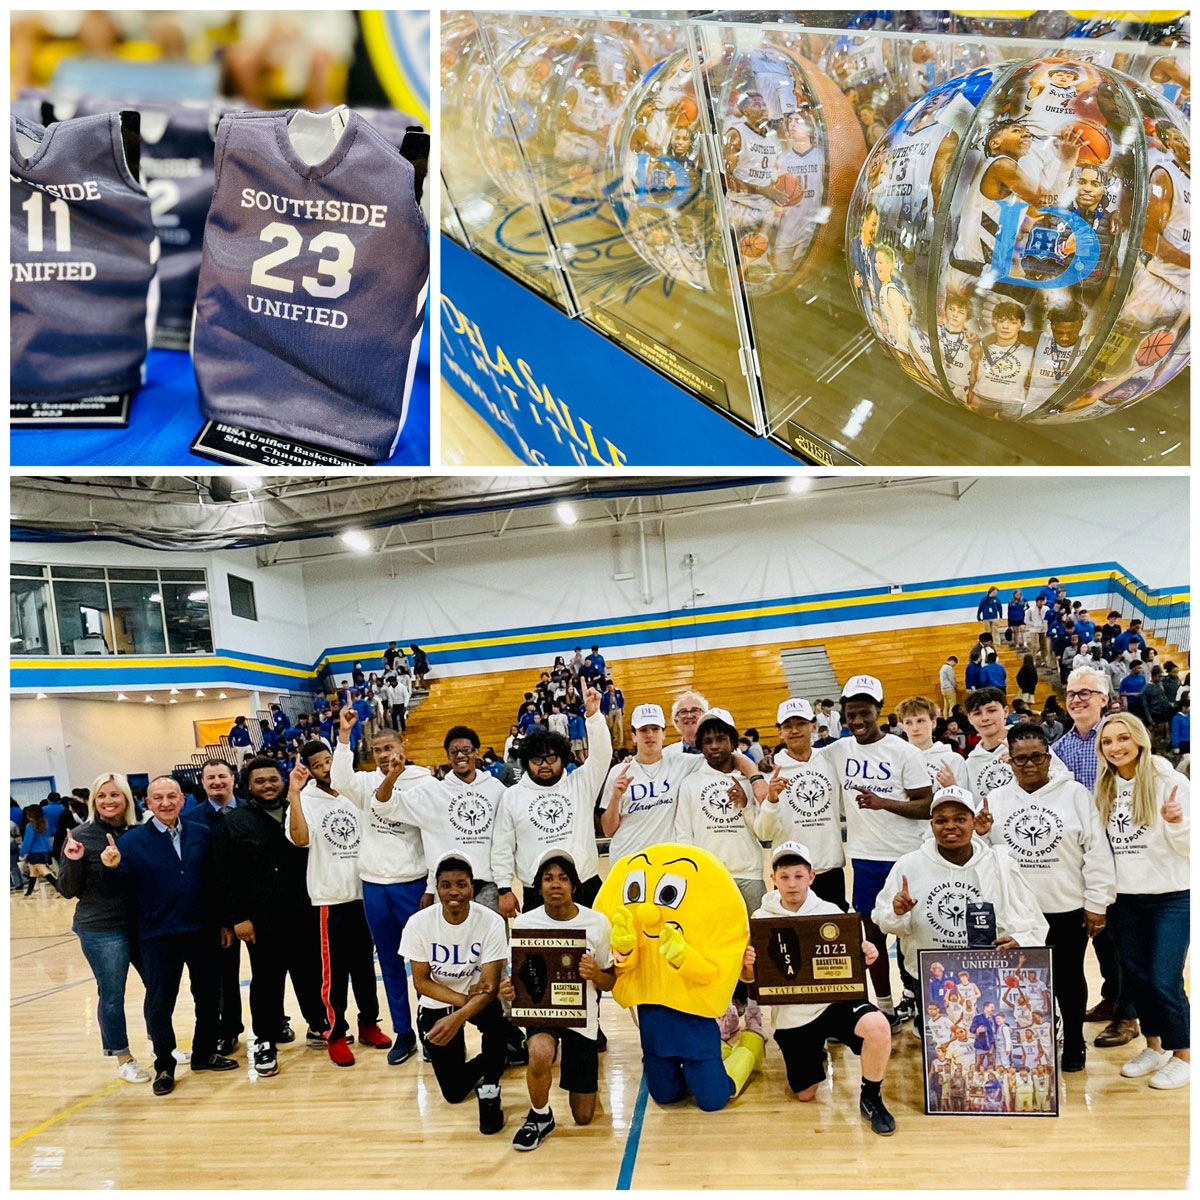 Images from last week's double school-wide celebration of the state champions Southside Unified Basketball are available at flic.kr/s/aHBqjAAJPF. Sweet swag by @PitonMedia & @minijerzeys